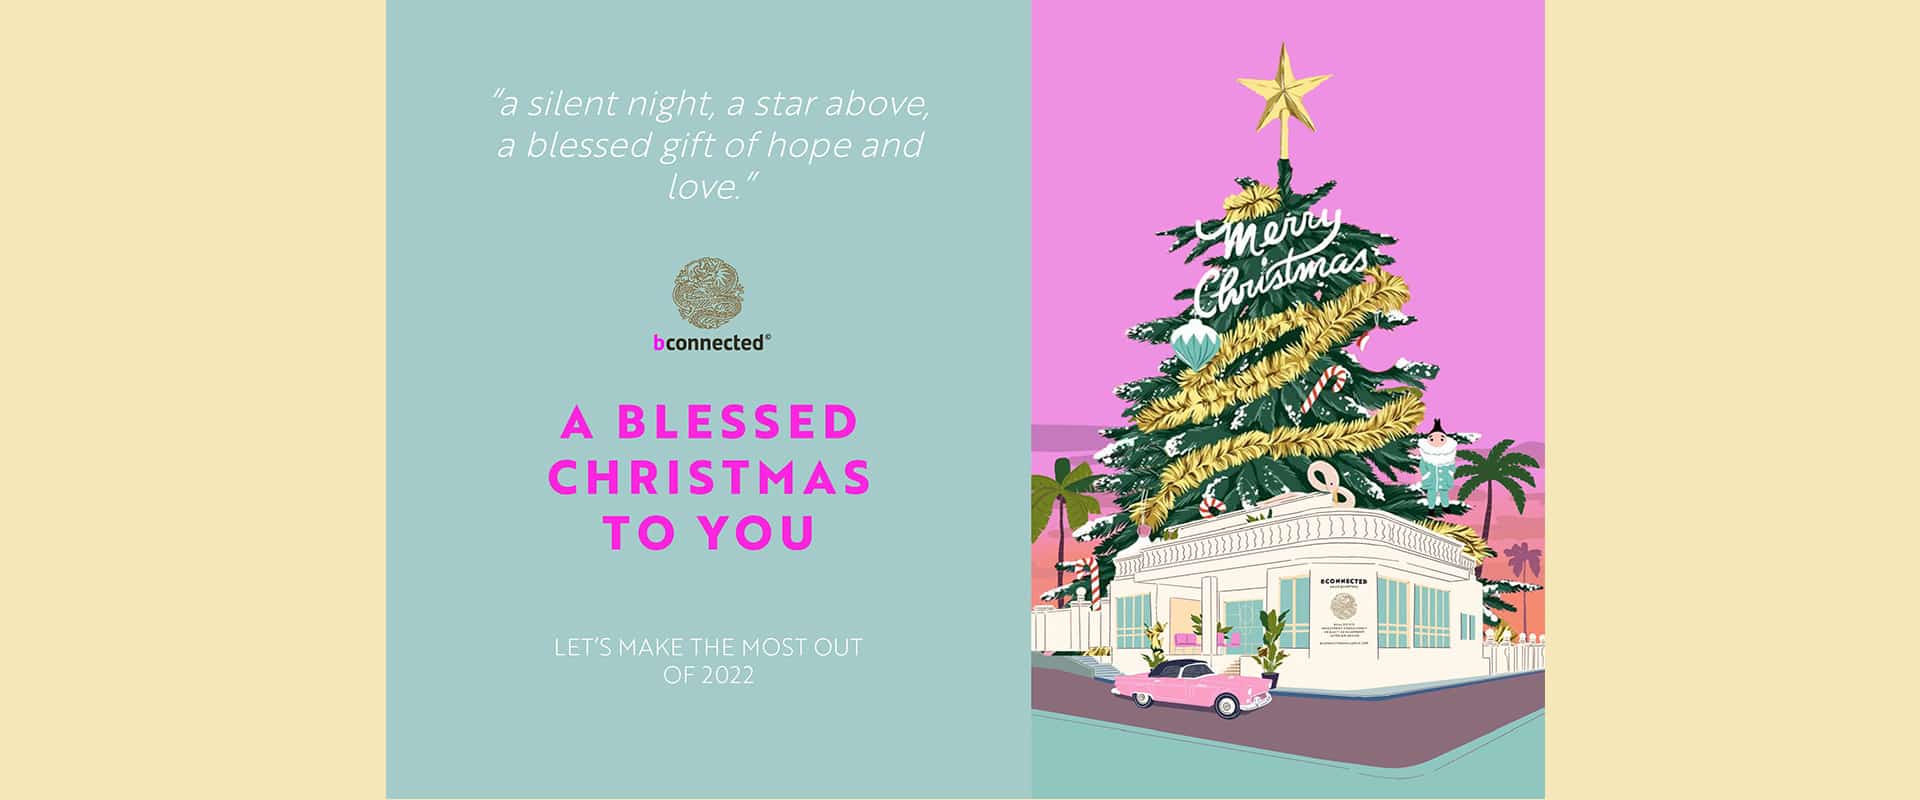 bconnected-blog-A blessed Christmas to you